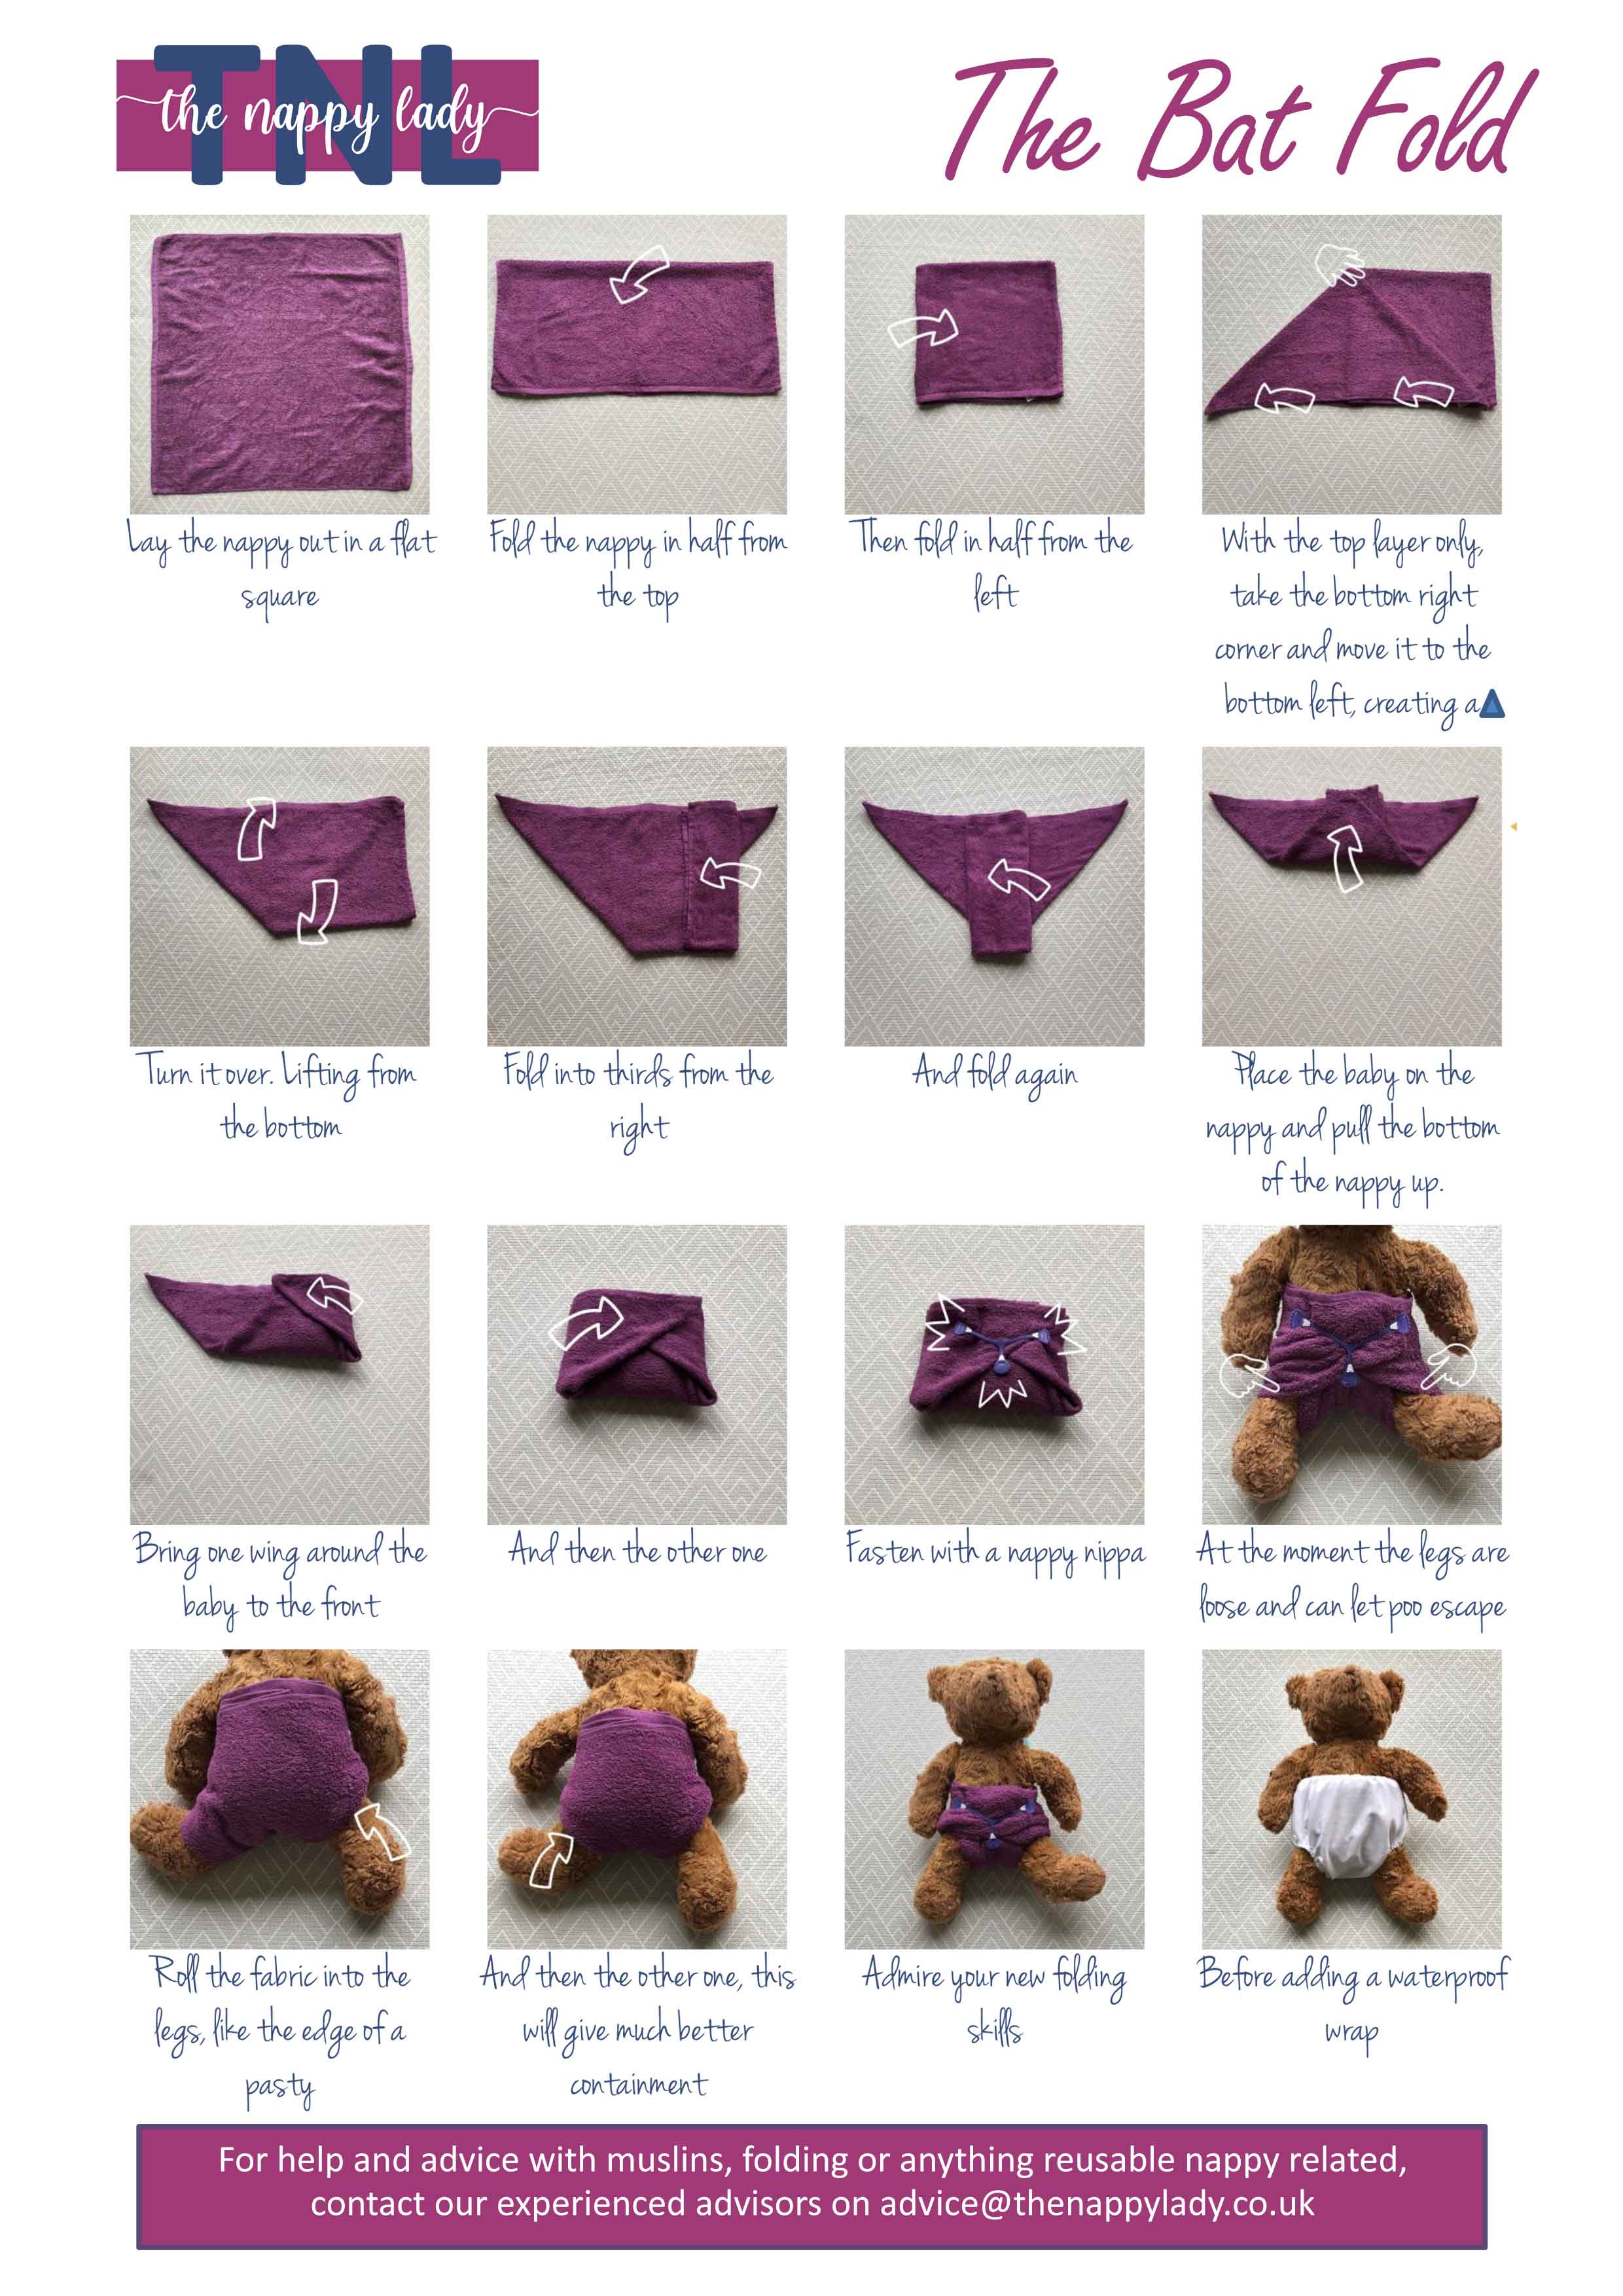 photo diagram of the bat fold for terry nappies